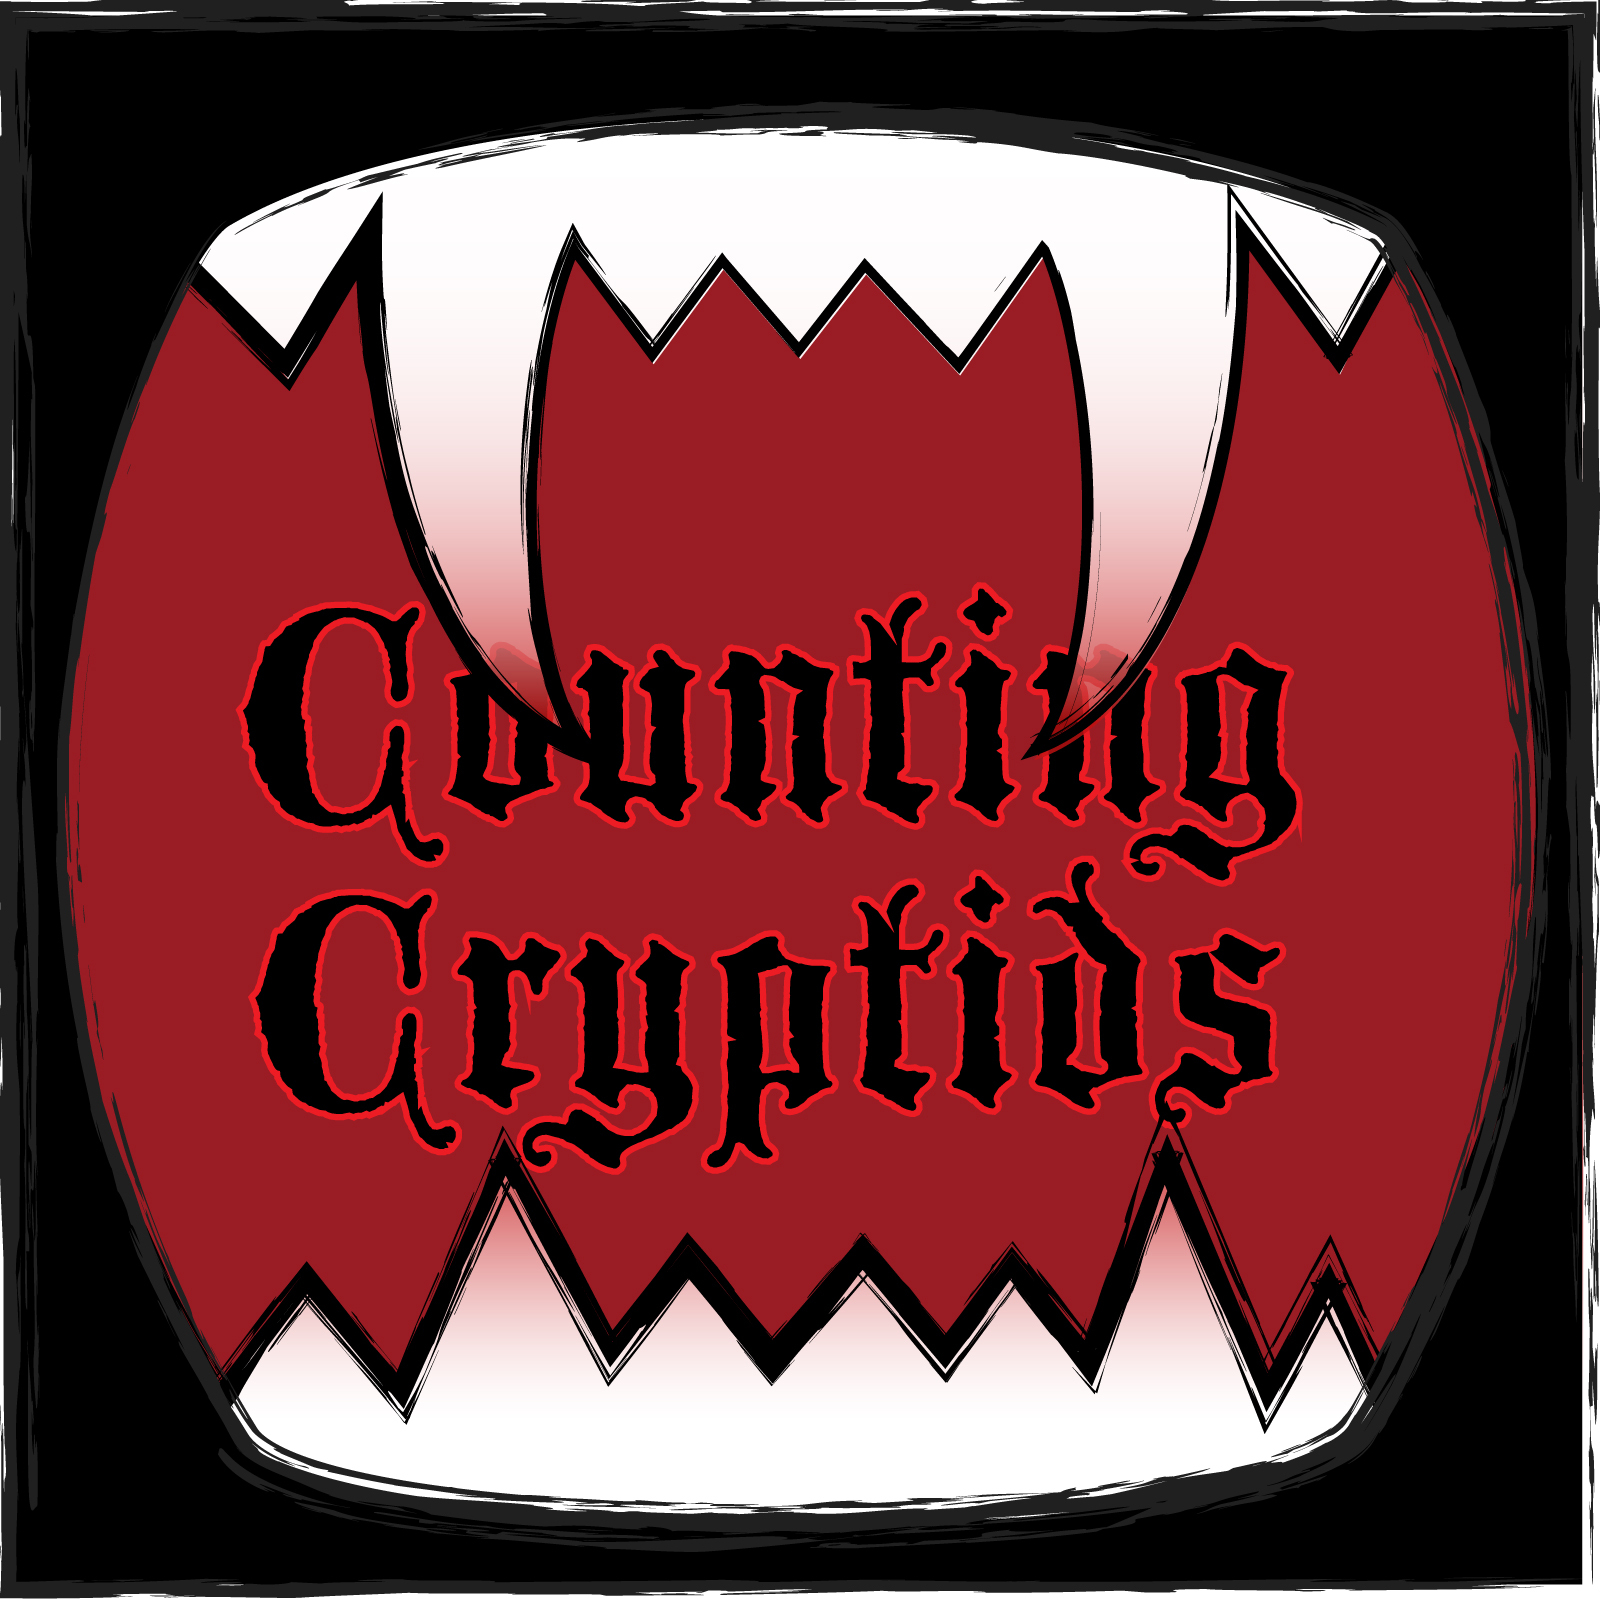 Ep. 0 - Introduction to the Counting Cryptids Podcast with Jacob and Connor